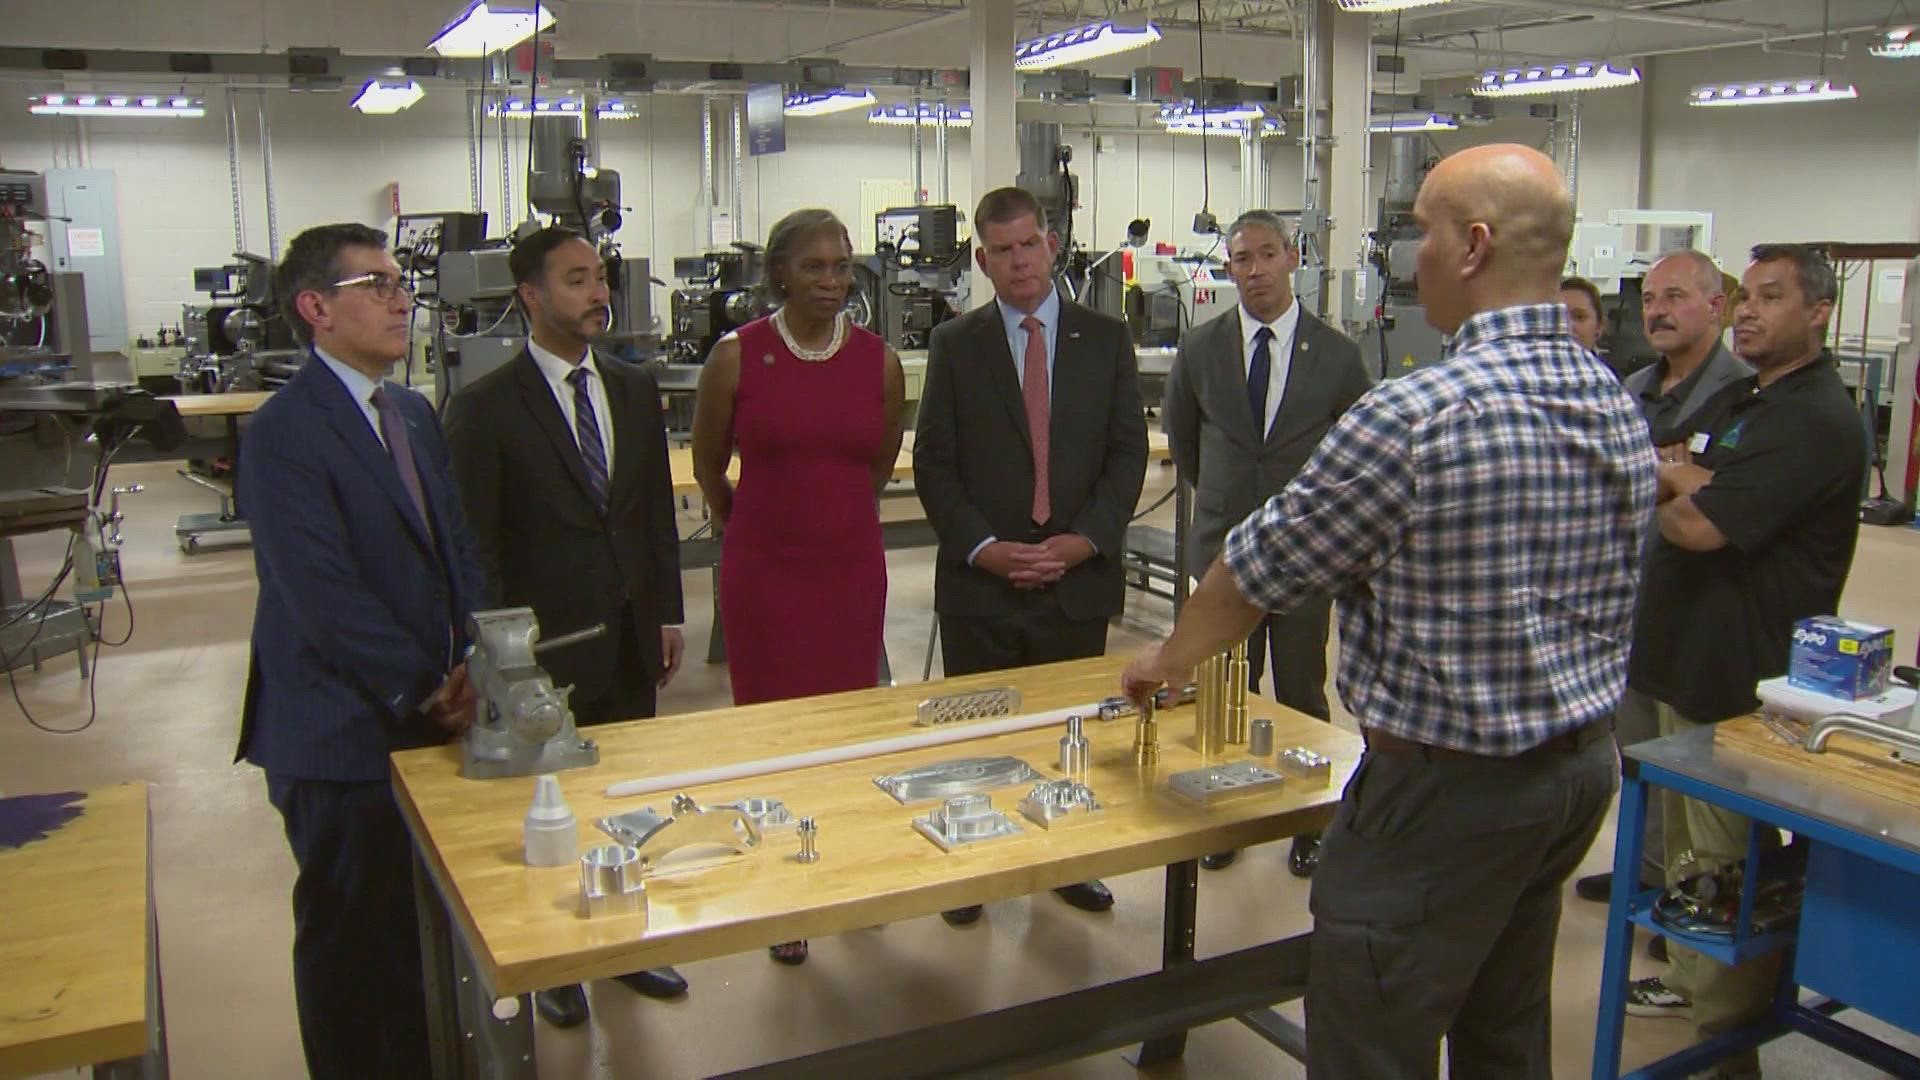 US Secretary of Labor Marty Walsh got a view of the work done by St. Philip’s College students in their aerospace and manufacturing labs.